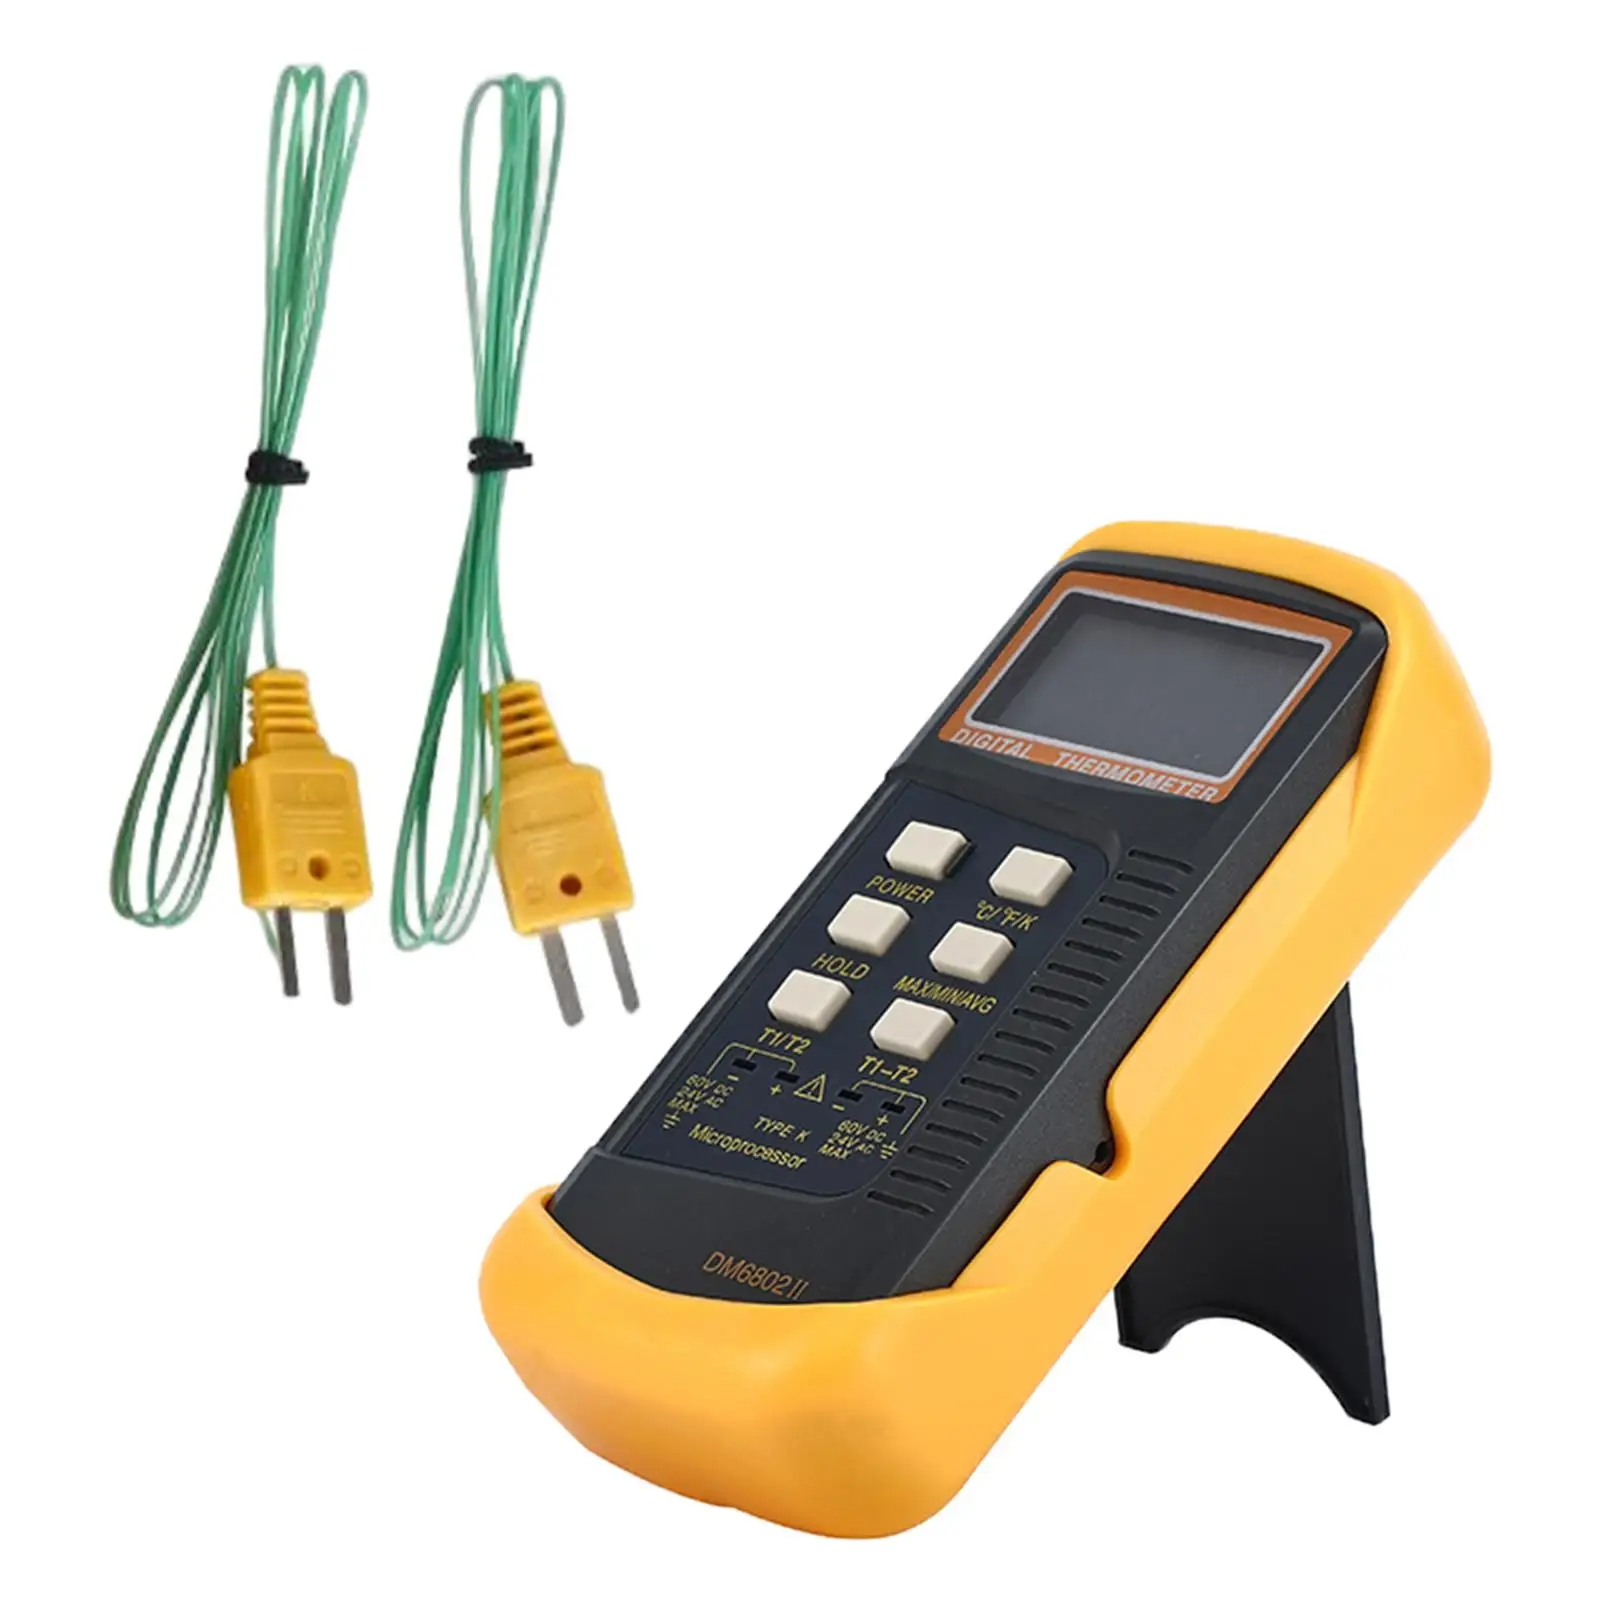 6802II Thermometer Temperature Meter Two Channels Measurement Meter Handheld with Pipe Clamp